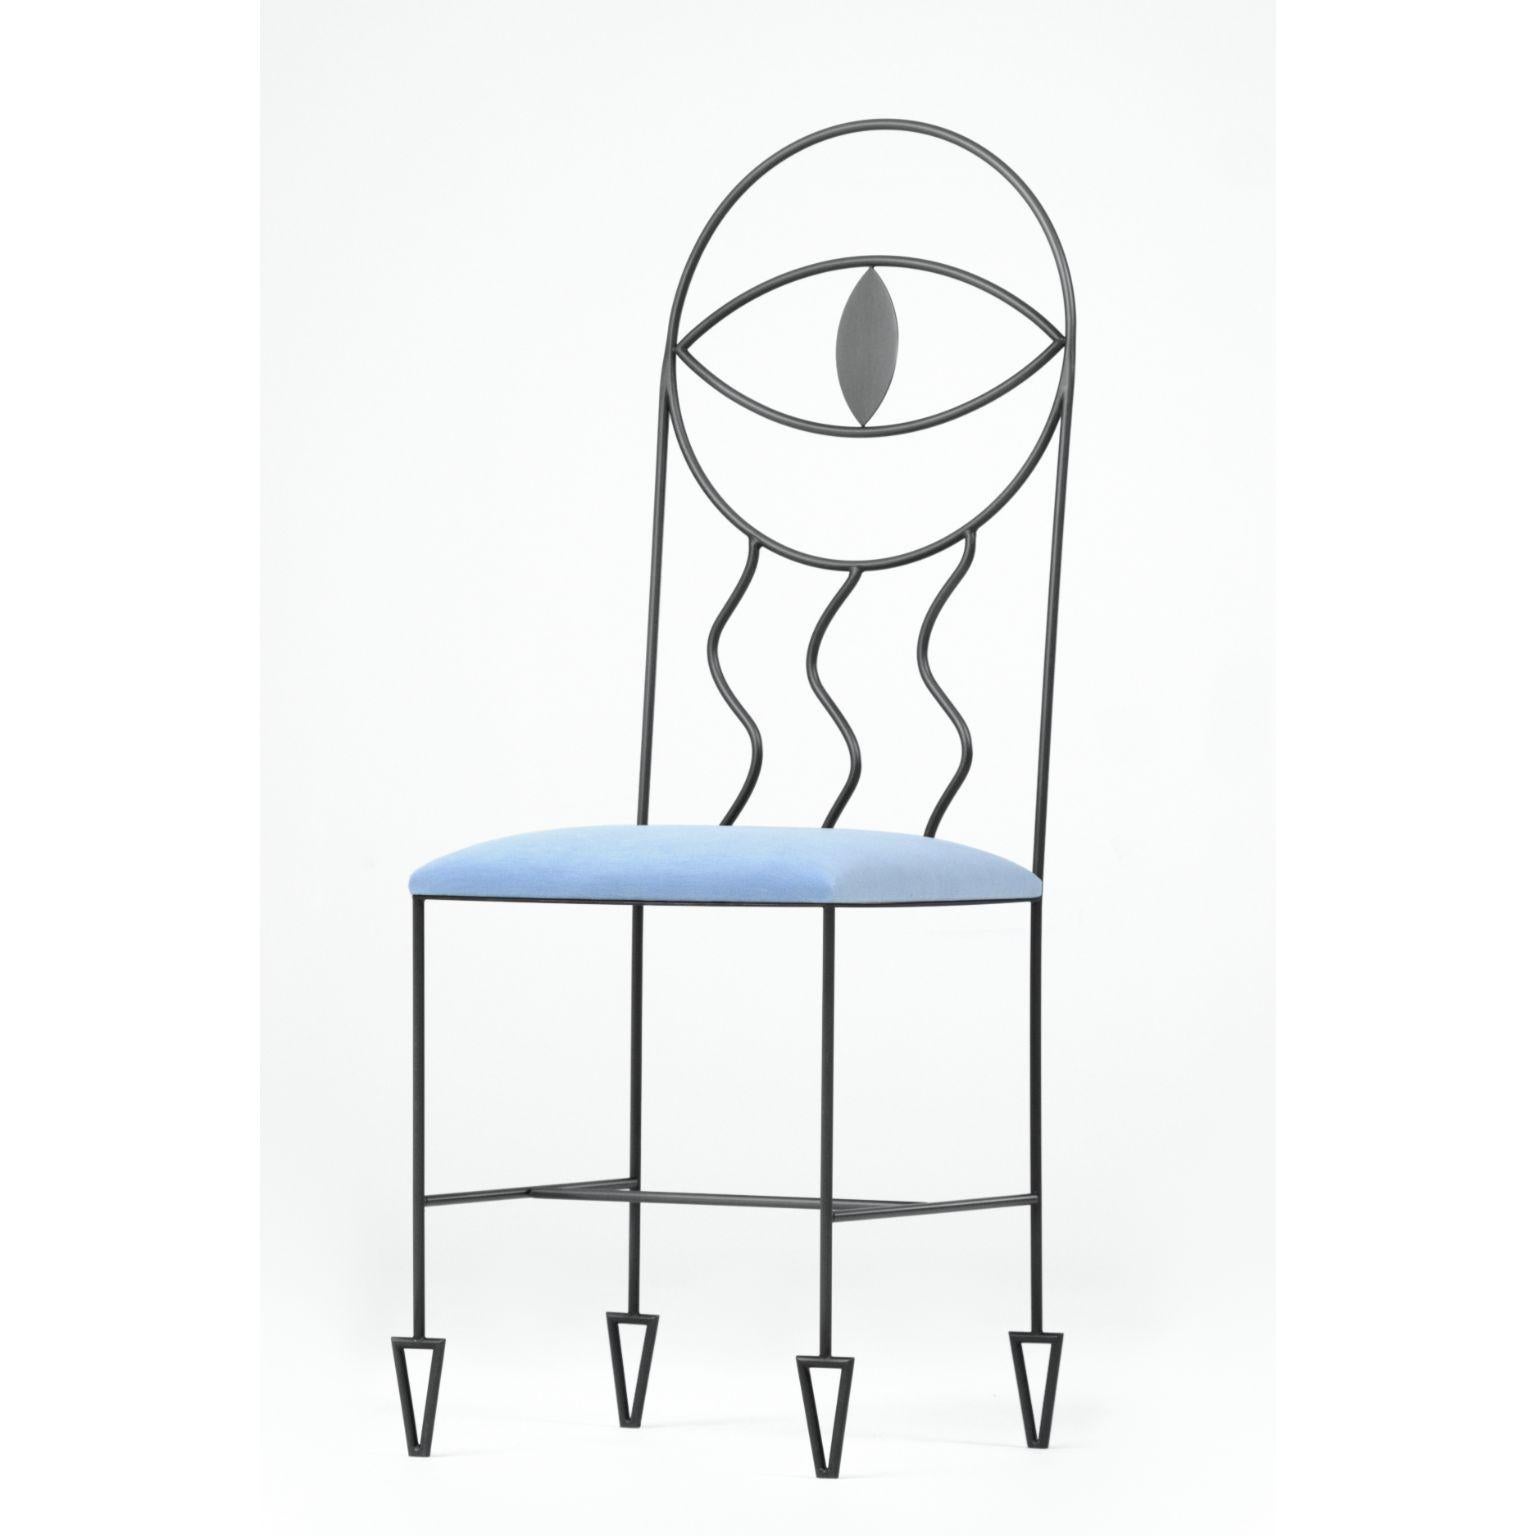 Ciclope Chair With Cushion by Qvinto Studio
Unique Piece. Handmade.
Dimensions: D 40 x W 40 x H 114 cm.
Materials: stainless steel and wool.

The eye, which we find here at the apex of the Ciclope (meaning Cyclops), is
inspired by the